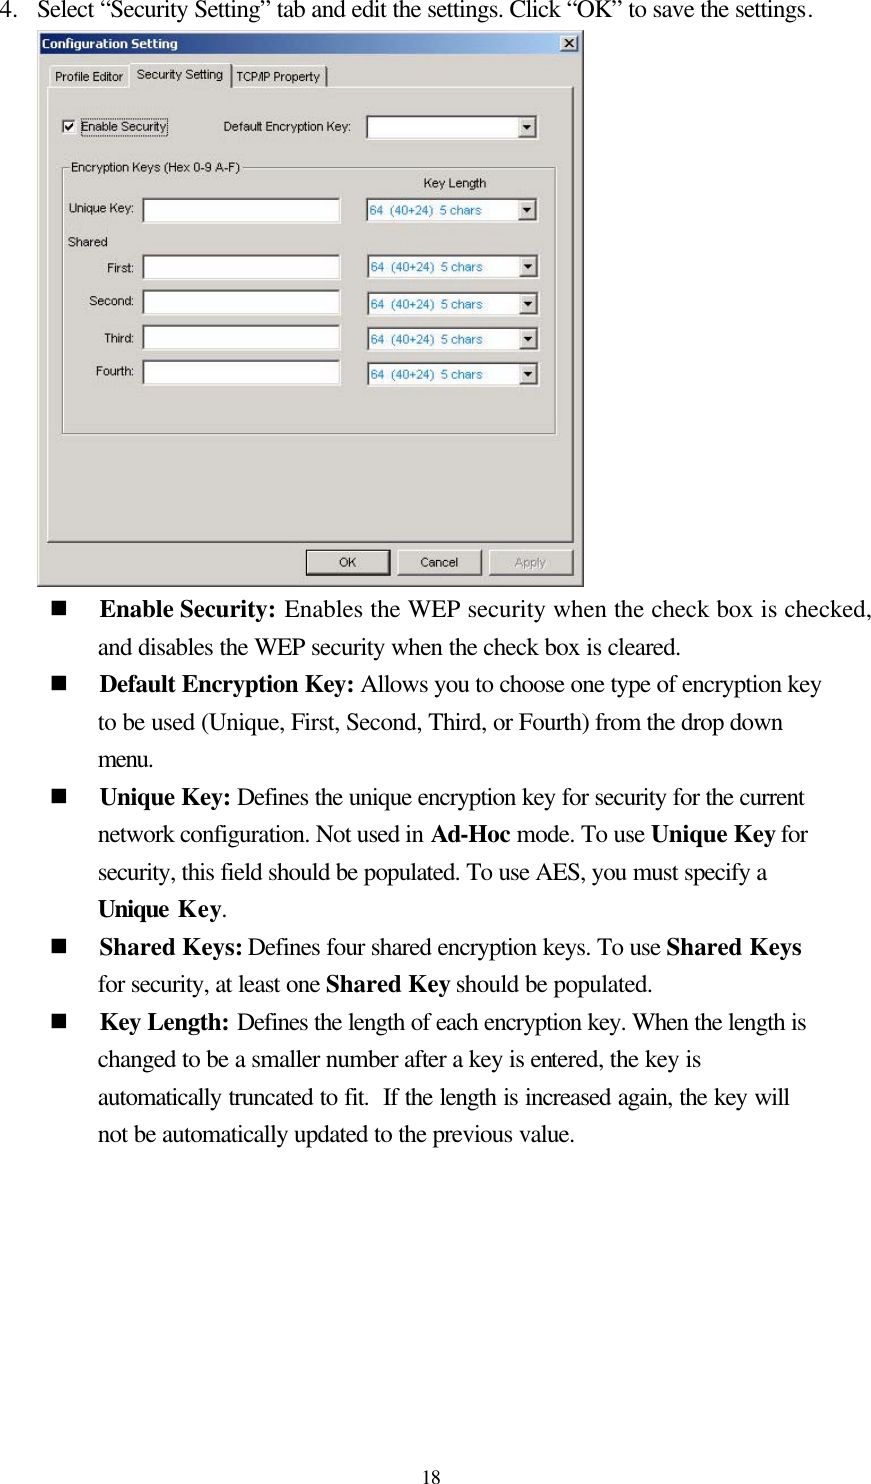  18 4.  Select “Security Setting” tab and edit the settings. Click “OK” to save the settings.  n Enable Security: Enables the WEP security when the check box is checked, and disables the WEP security when the check box is cleared. n Default Encryption Key: Allows you to choose one type of encryption key to be used (Unique, First, Second, Third, or Fourth) from the drop down menu. n Unique Key: Defines the unique encryption key for security for the current network configuration. Not used in Ad-Hoc mode. To use Unique Key for security, this field should be populated. To use AES, you must specify a Unique Key. n Shared Keys: Defines four shared encryption keys. To use Shared Keys for security, at least one Shared Key should be populated. n Key Length: Defines the length of each encryption key. When the length is changed to be a smaller number after a key is entered, the key is automatically truncated to fit.  If the length is increased again, the key will not be automatically updated to the previous value.   